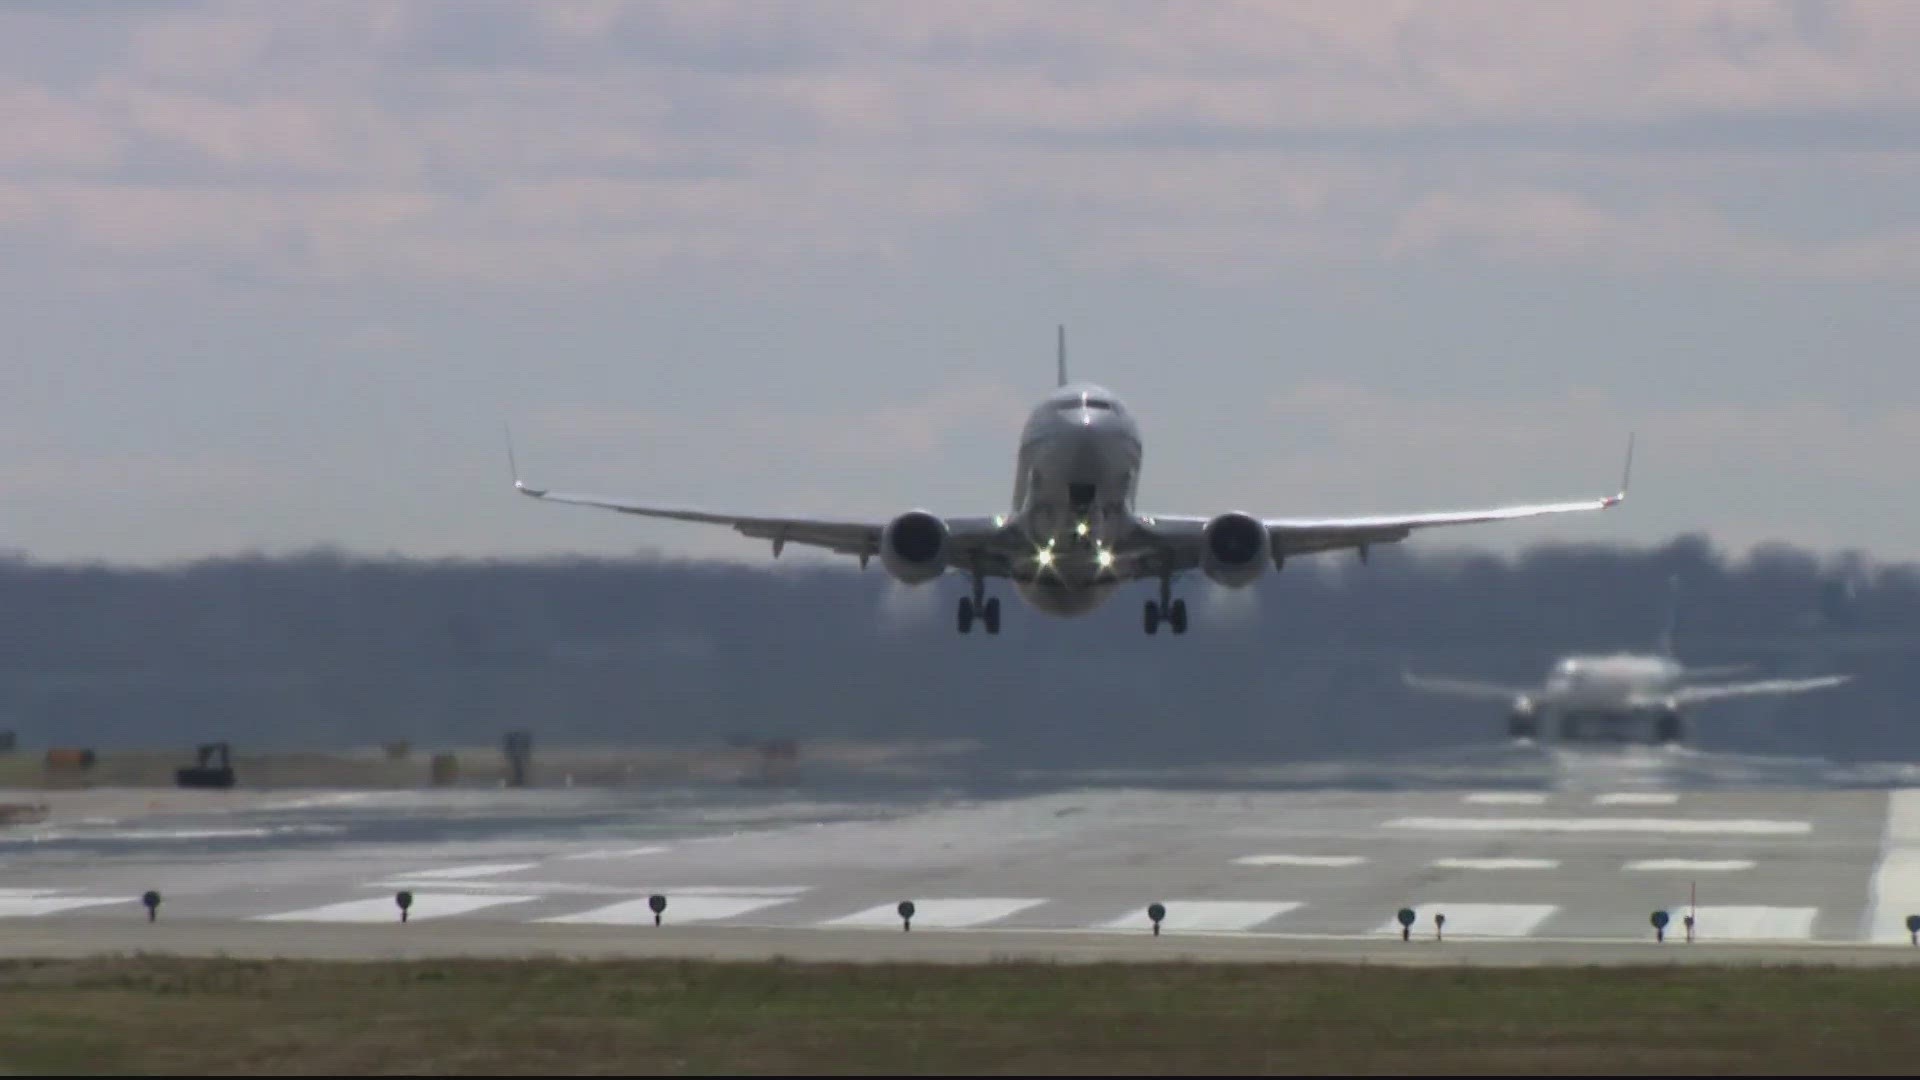 Federal officials announced they're investigating after a taxiing airplane took a wrong turn and crossed a runway where another plane was preparing to take off.